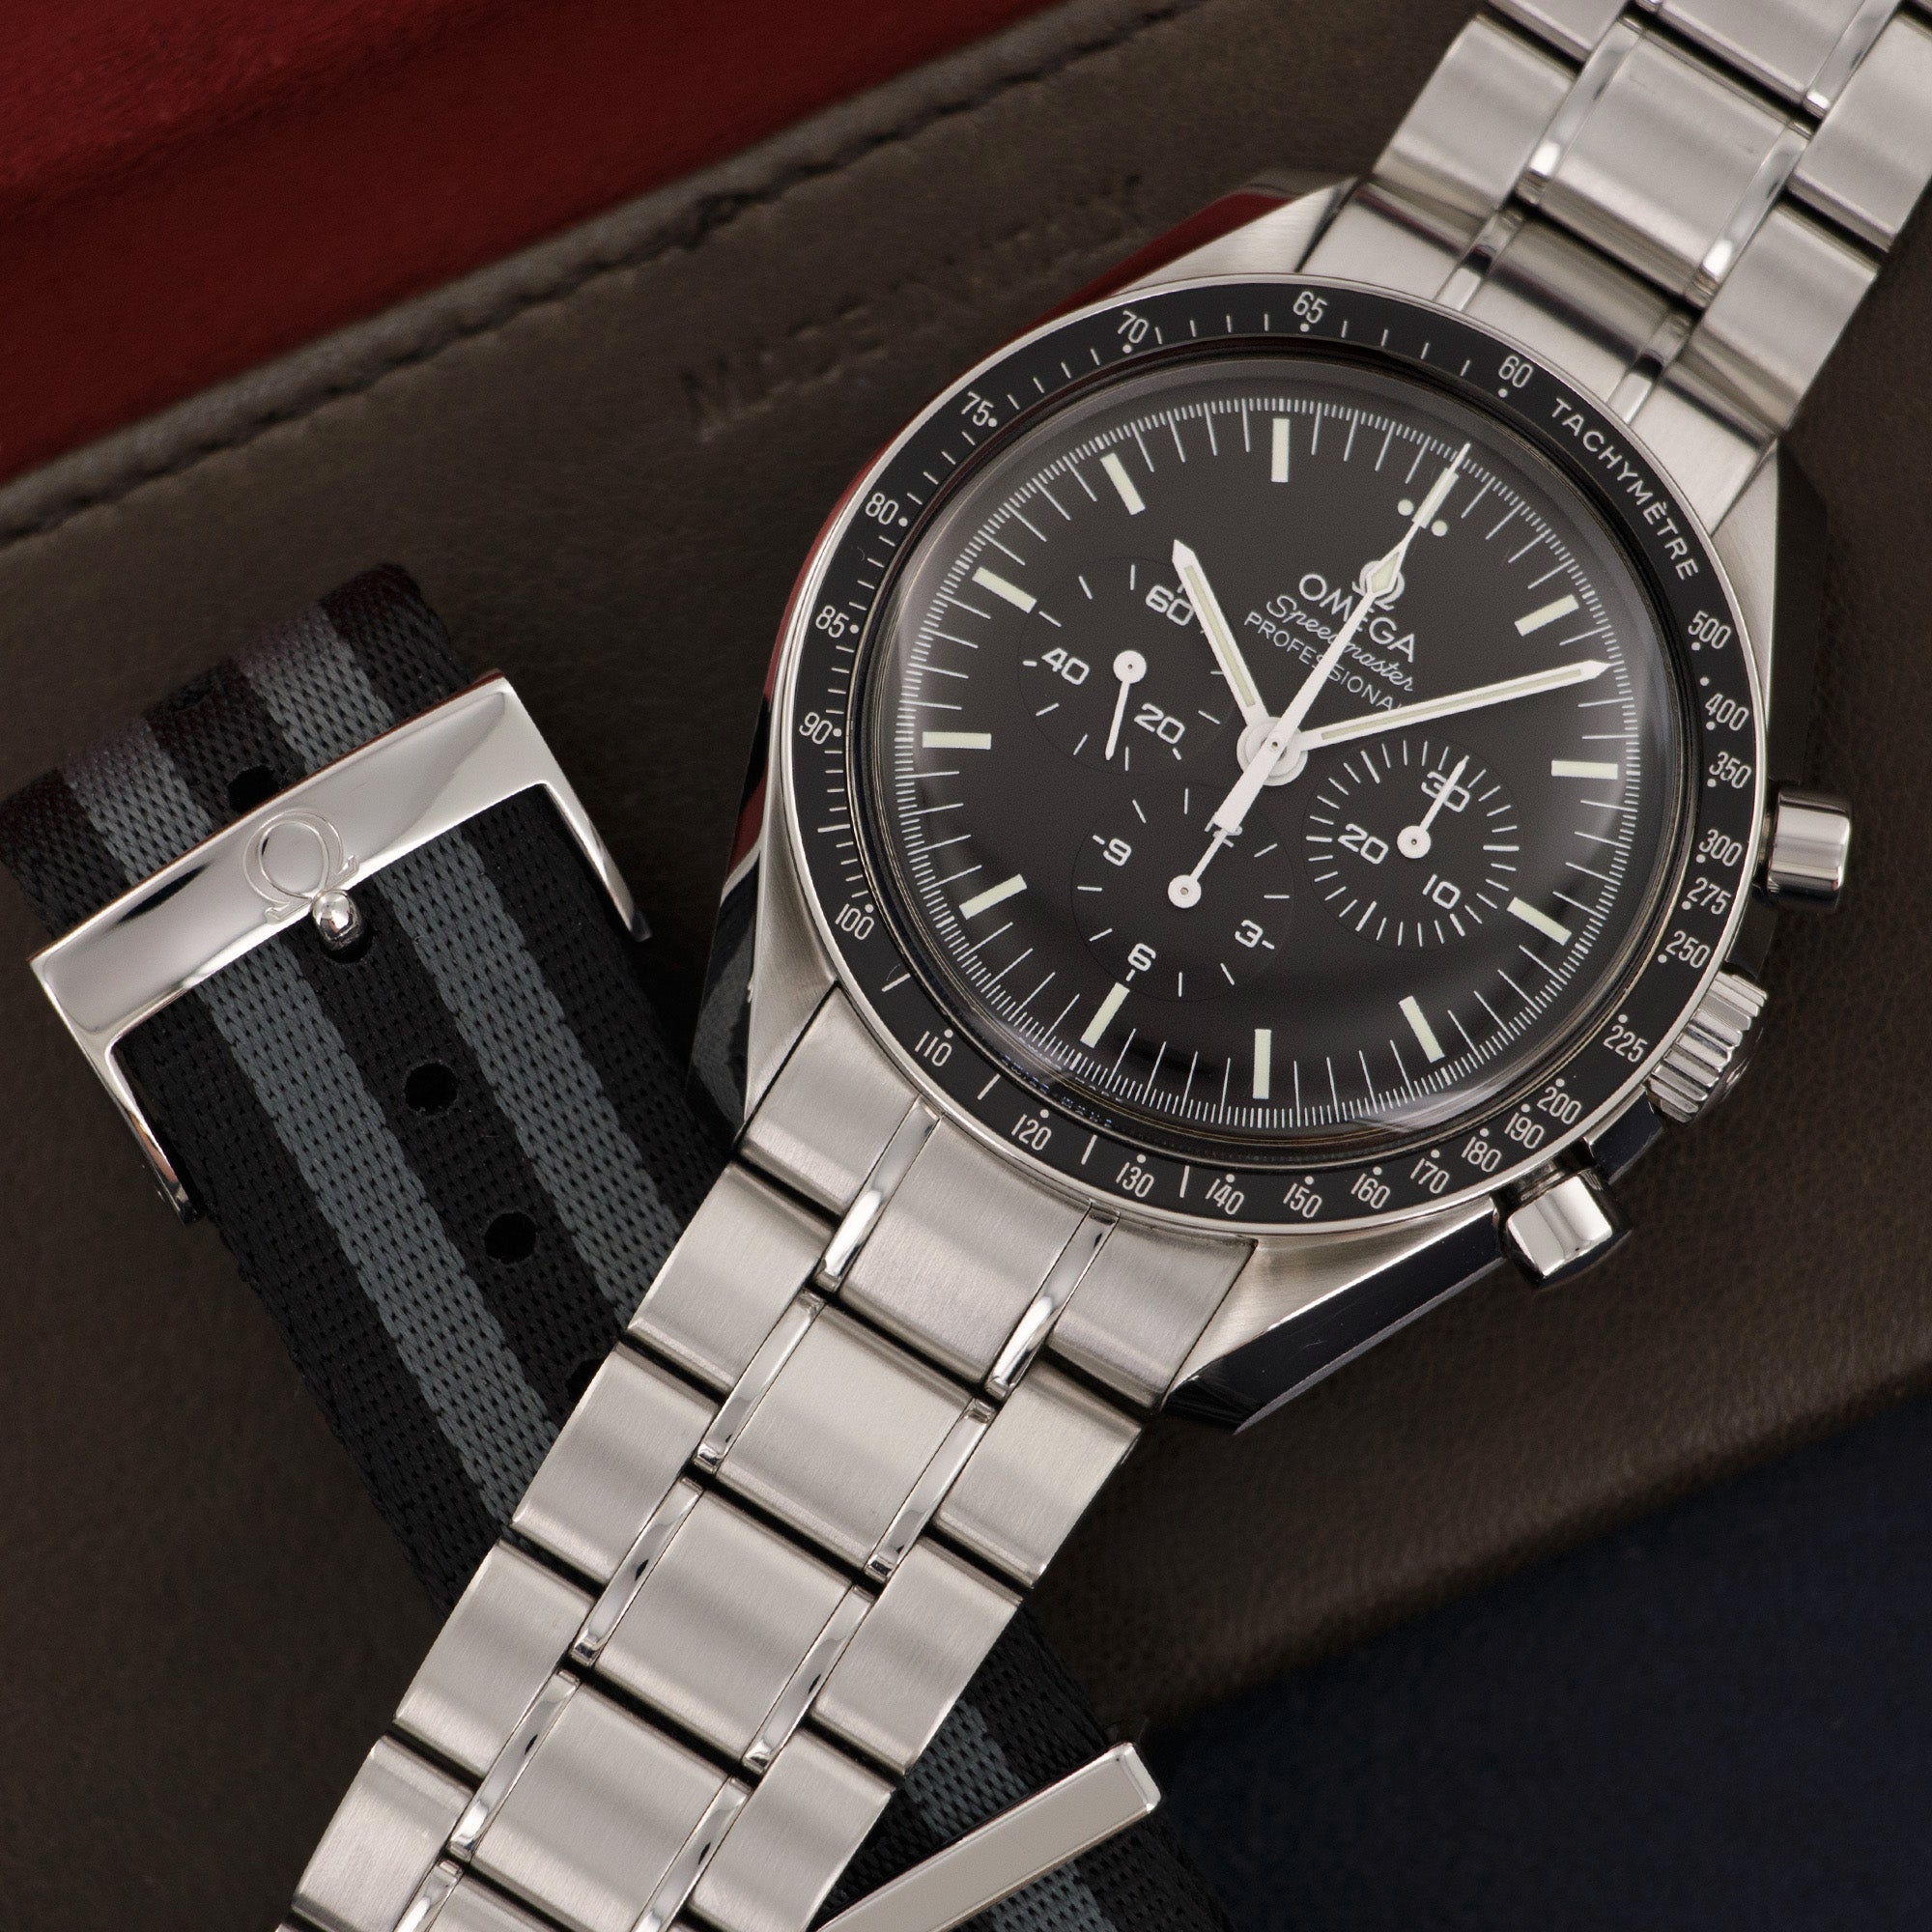 Omega - Omega Speedmaster Professional Man on the Moon Watch - The Keystone Watches